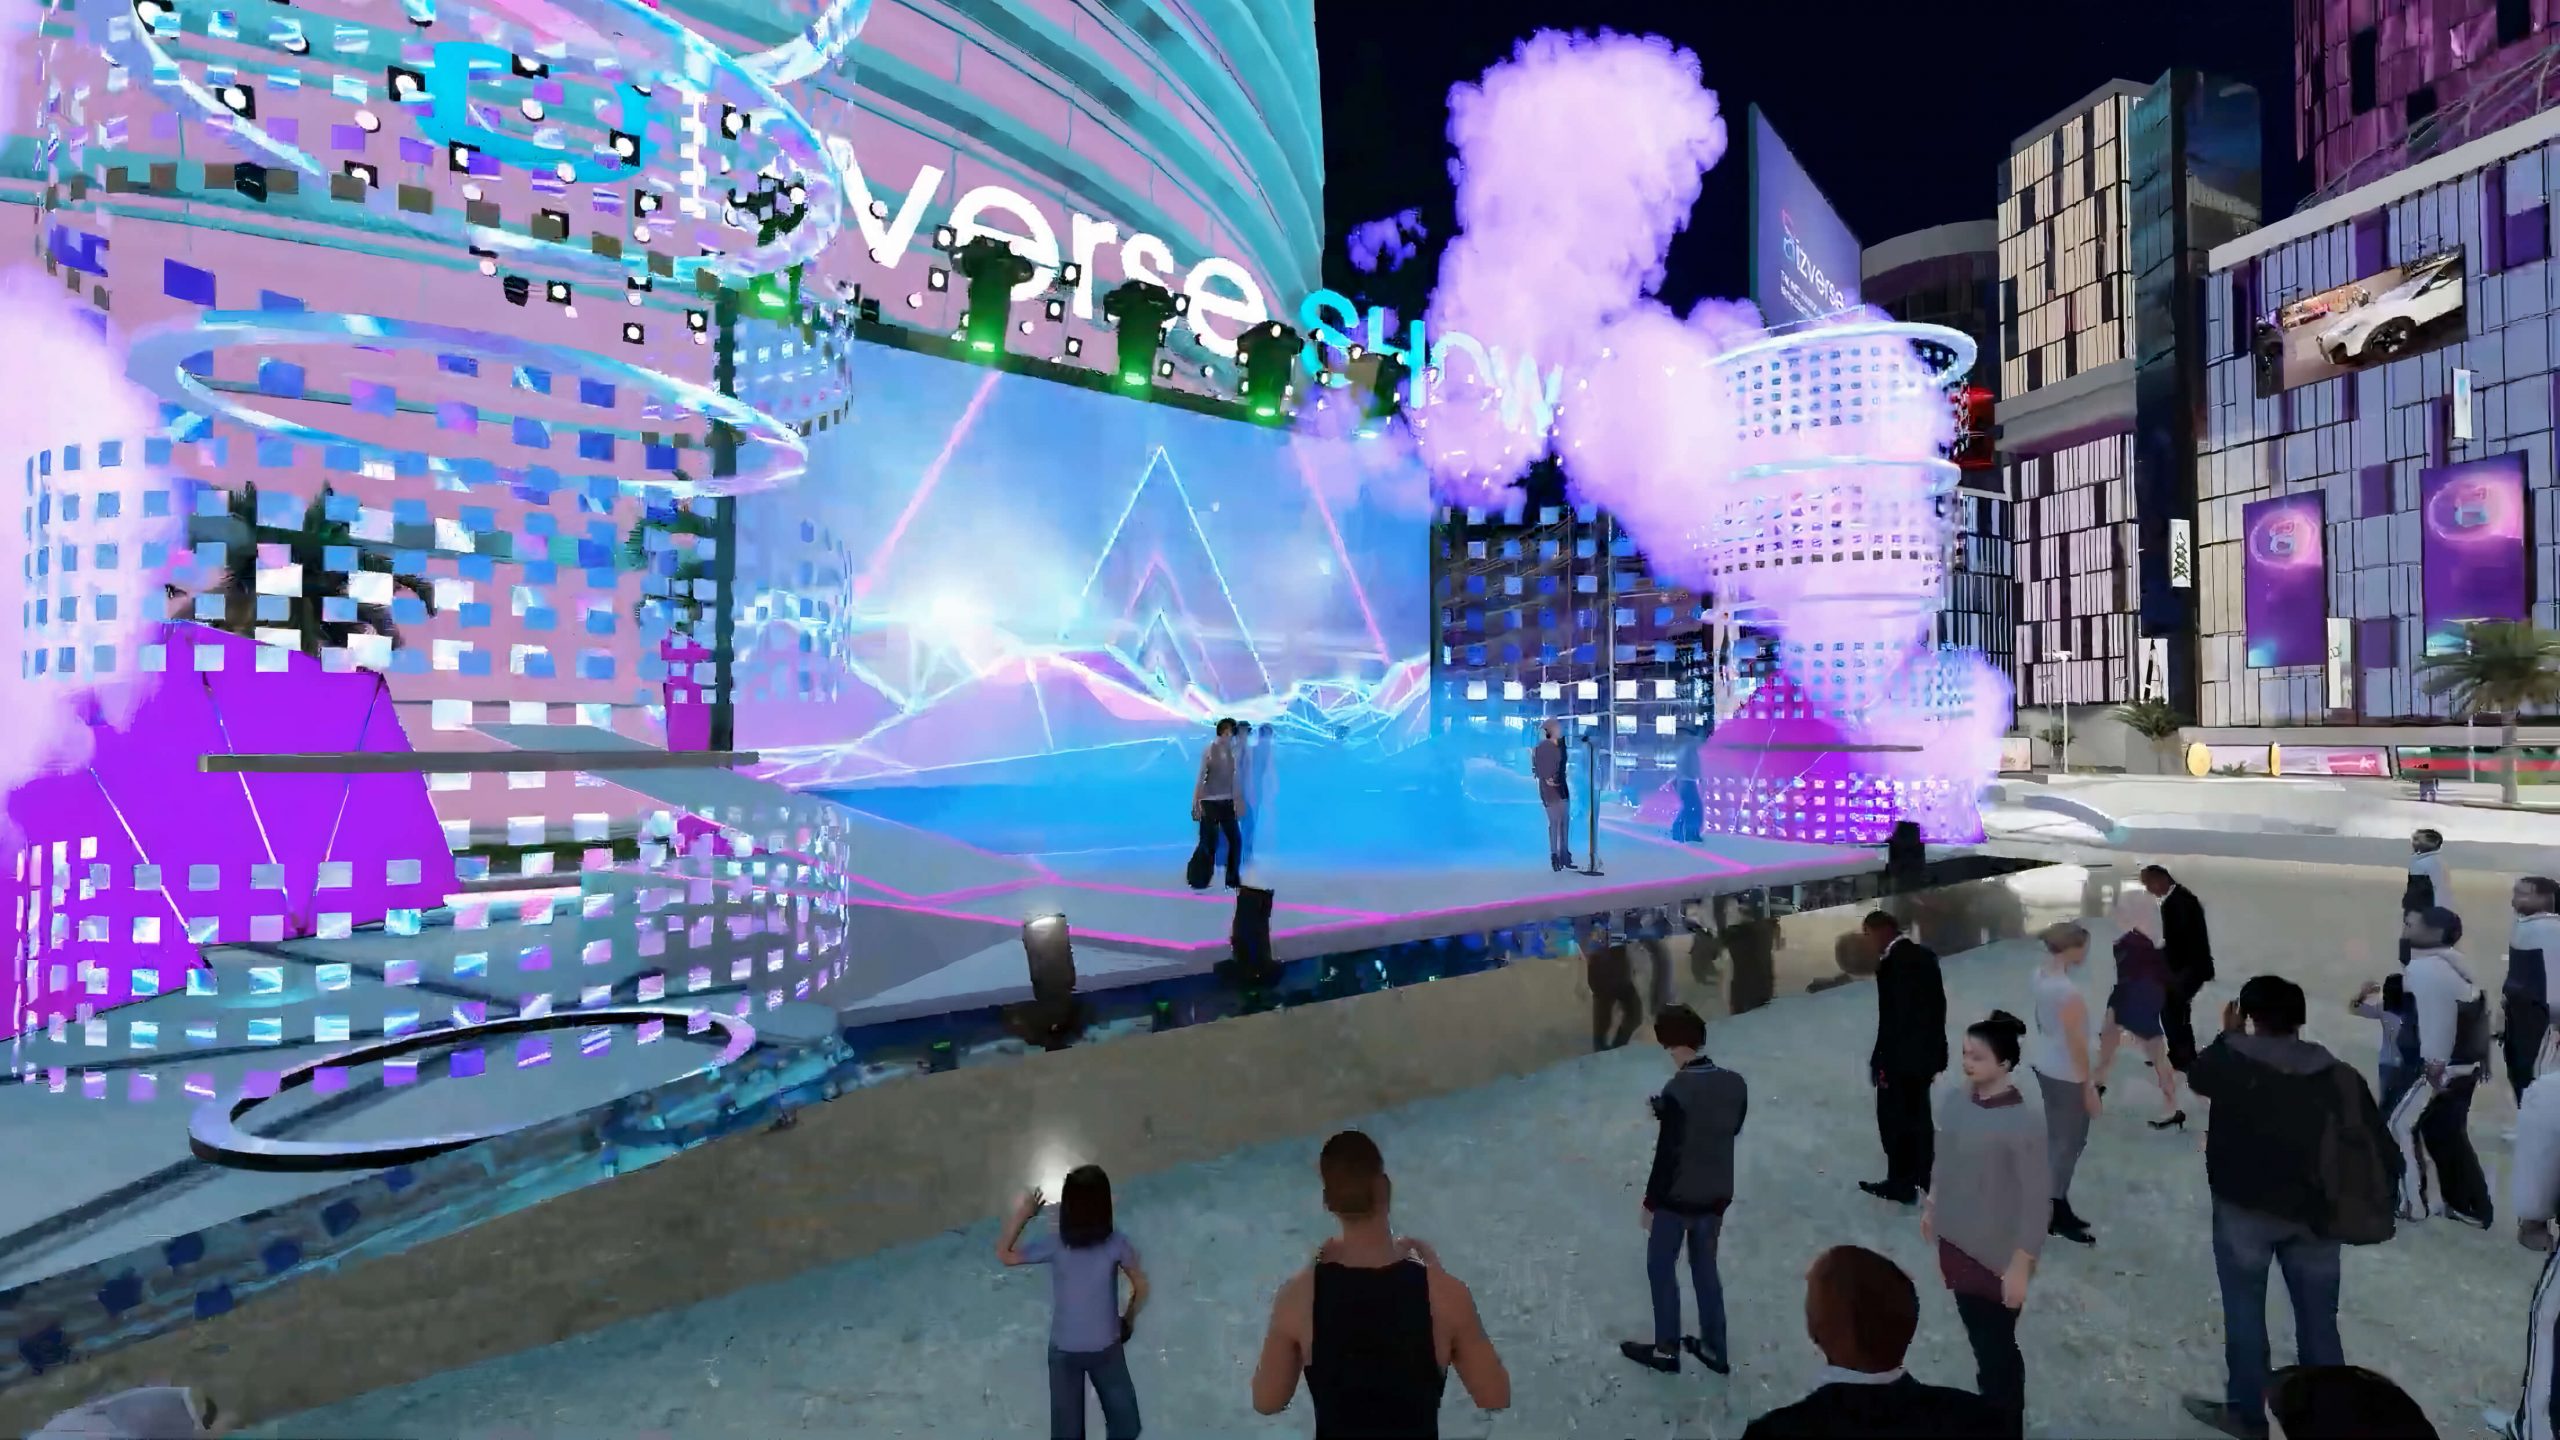 Virtual stage - future trend of event organization